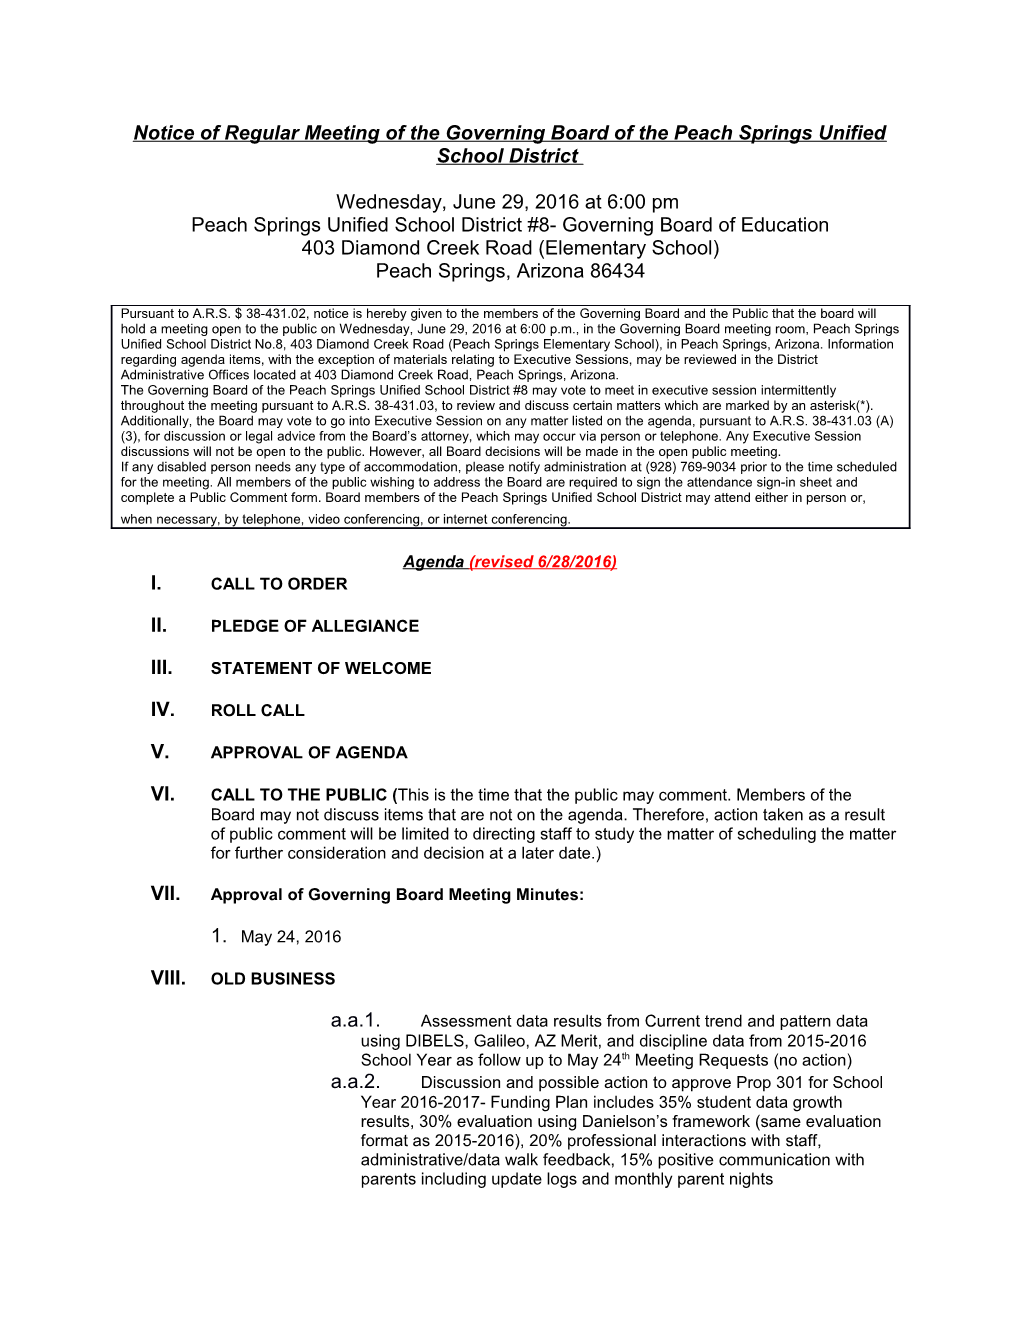 Notice of Regular Meeting of the Governing Board of the Peach Springs Unified School District